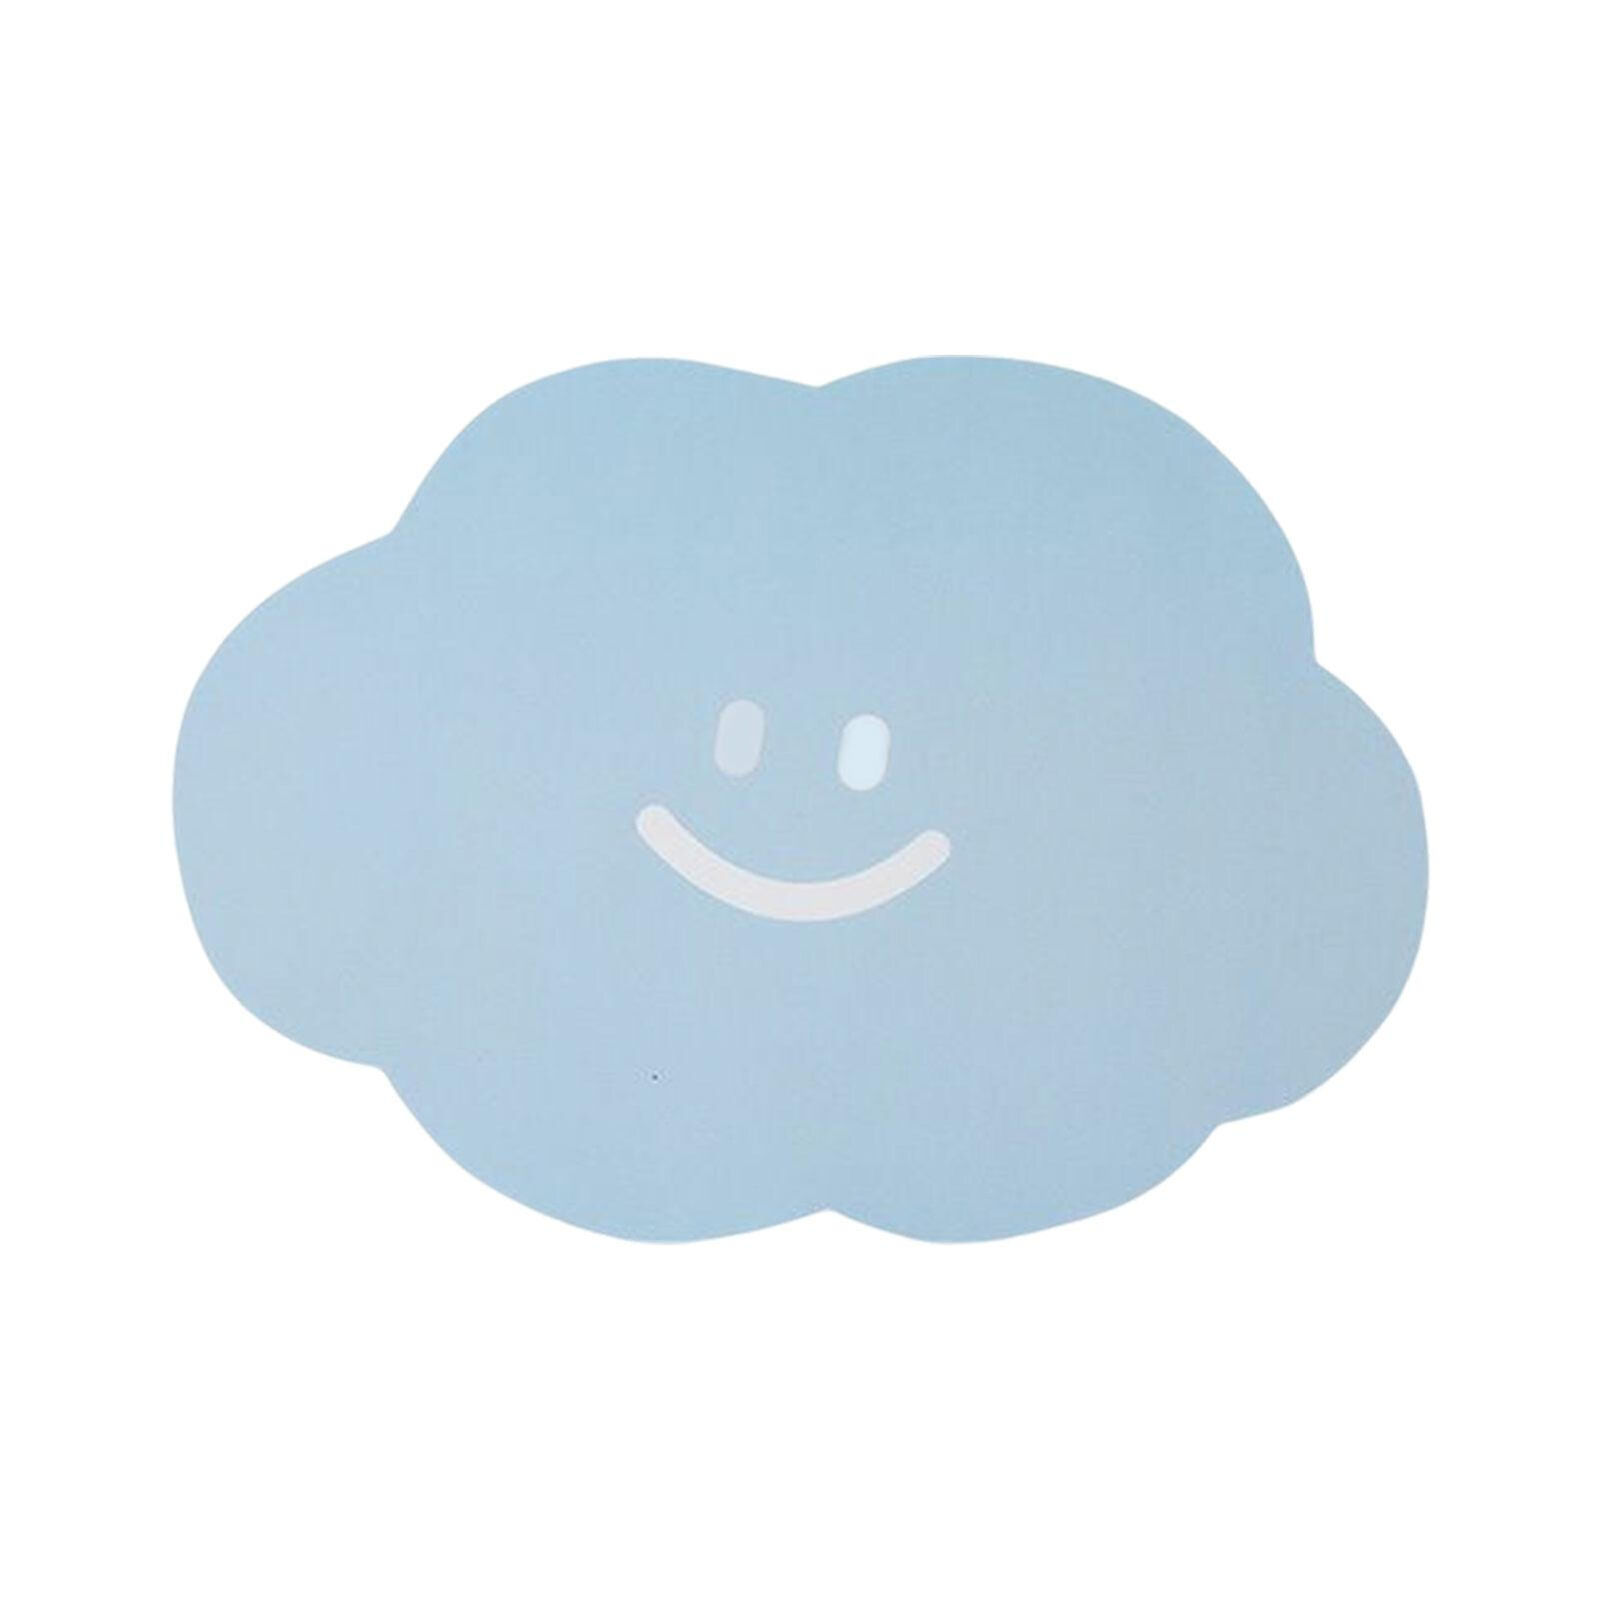 Mouse Pad Cute Cloud Mouse Pad Small Waterproof PVC Non-Slip Mouse Mat